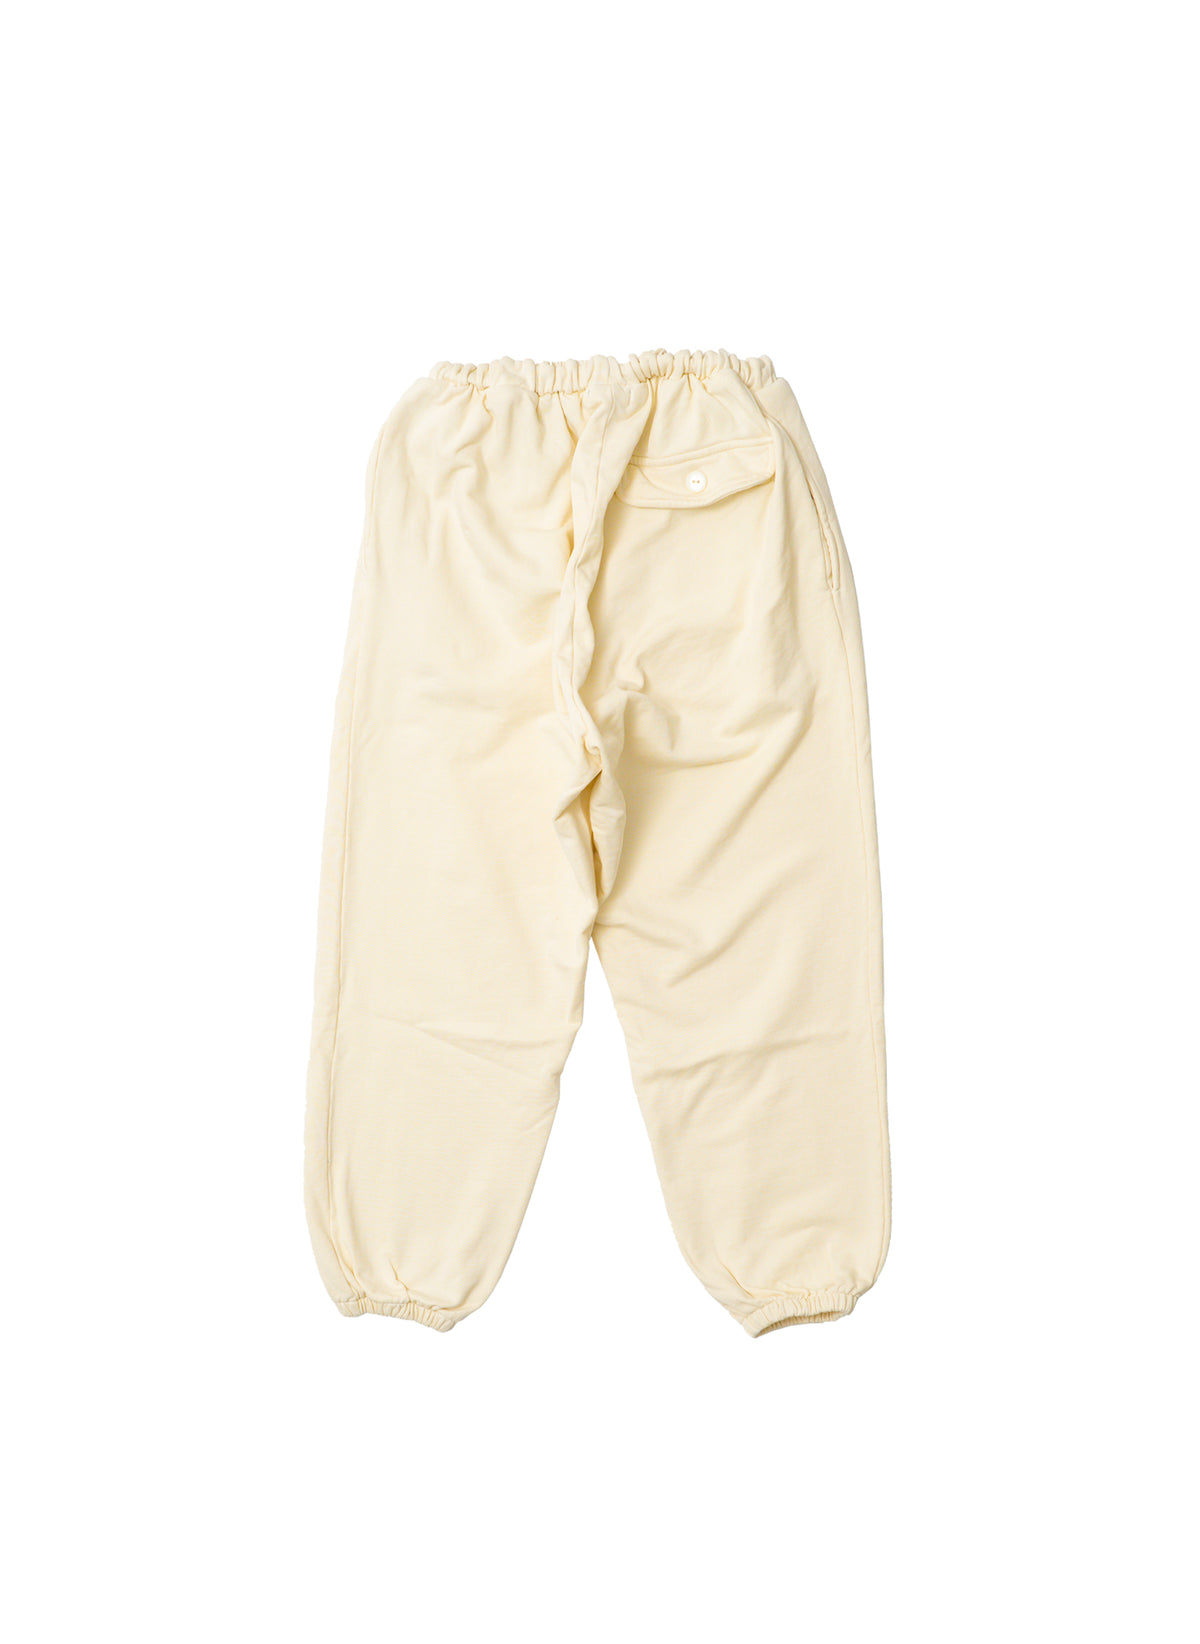 <span style="color: #f50b0b;">Last One</span> 
WILLY CHAVARRIA / BIG DADDY SWEAT PANT CERAMIC